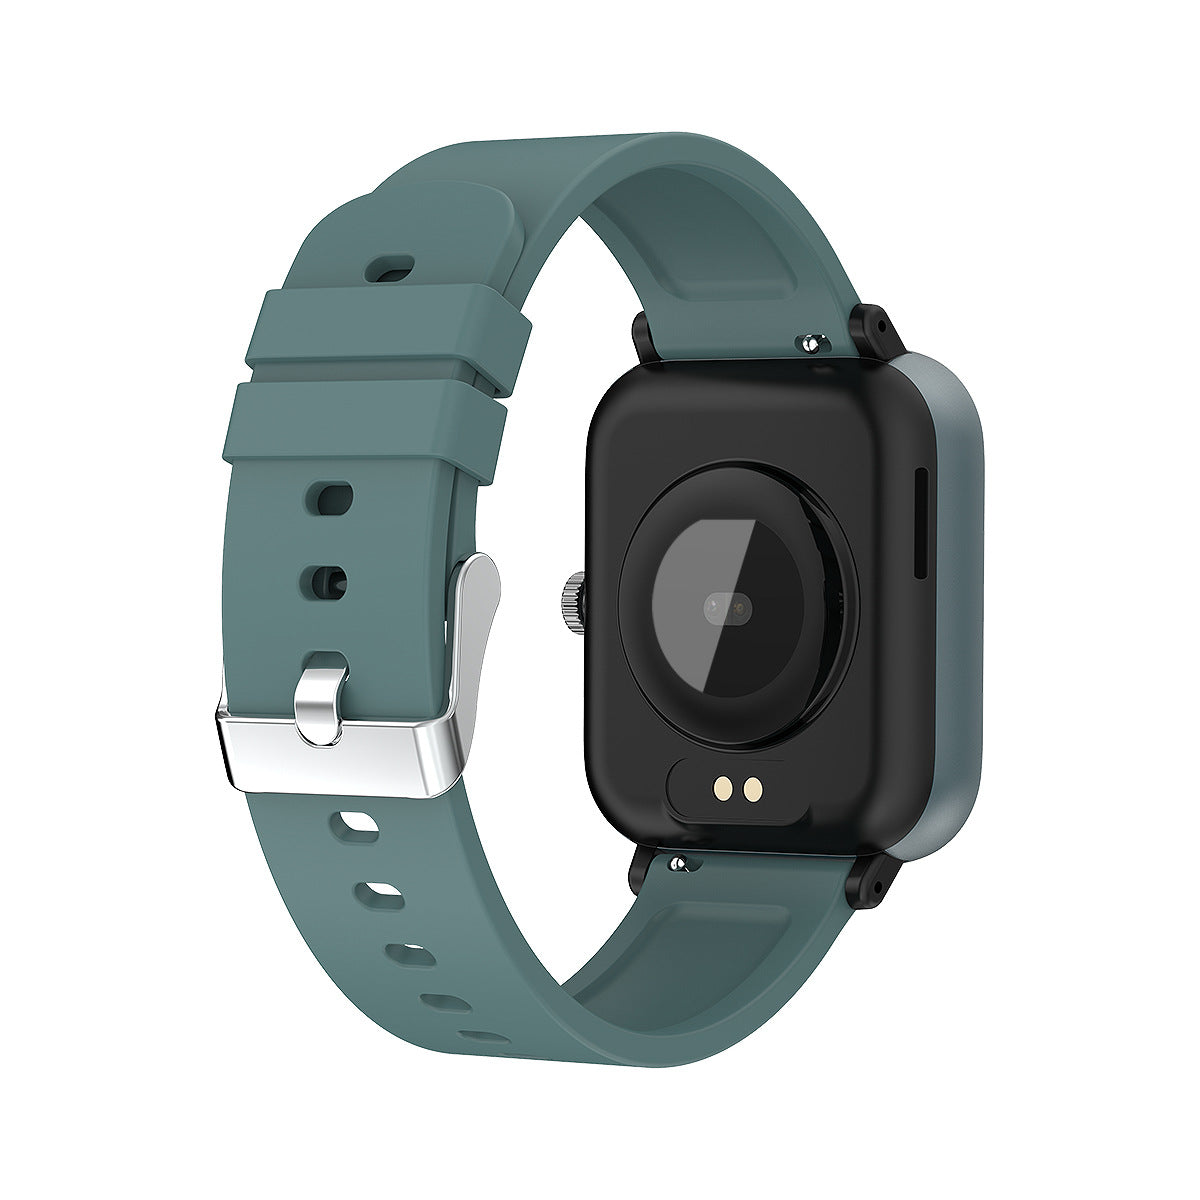 Stay connected with the Bluetooth call smart watch from Smart Watch South Africa